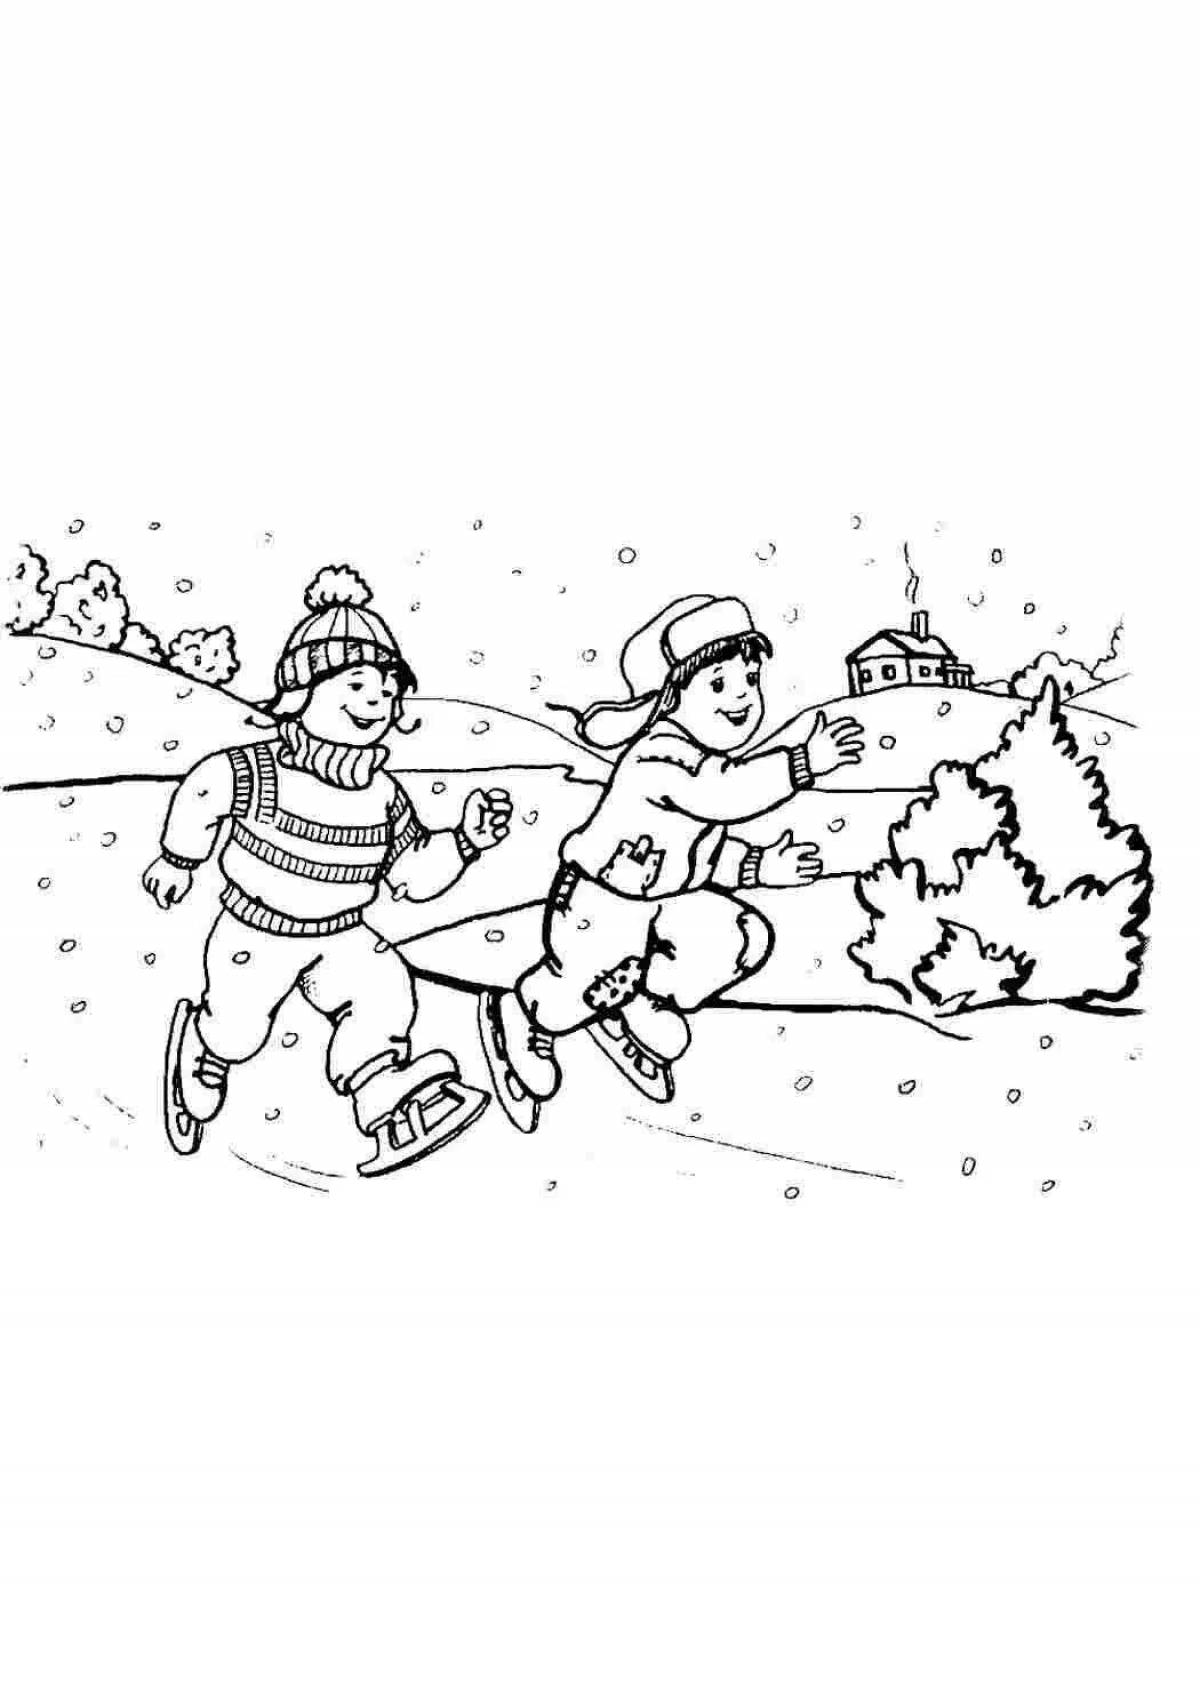 Coloring page adorable winter safety